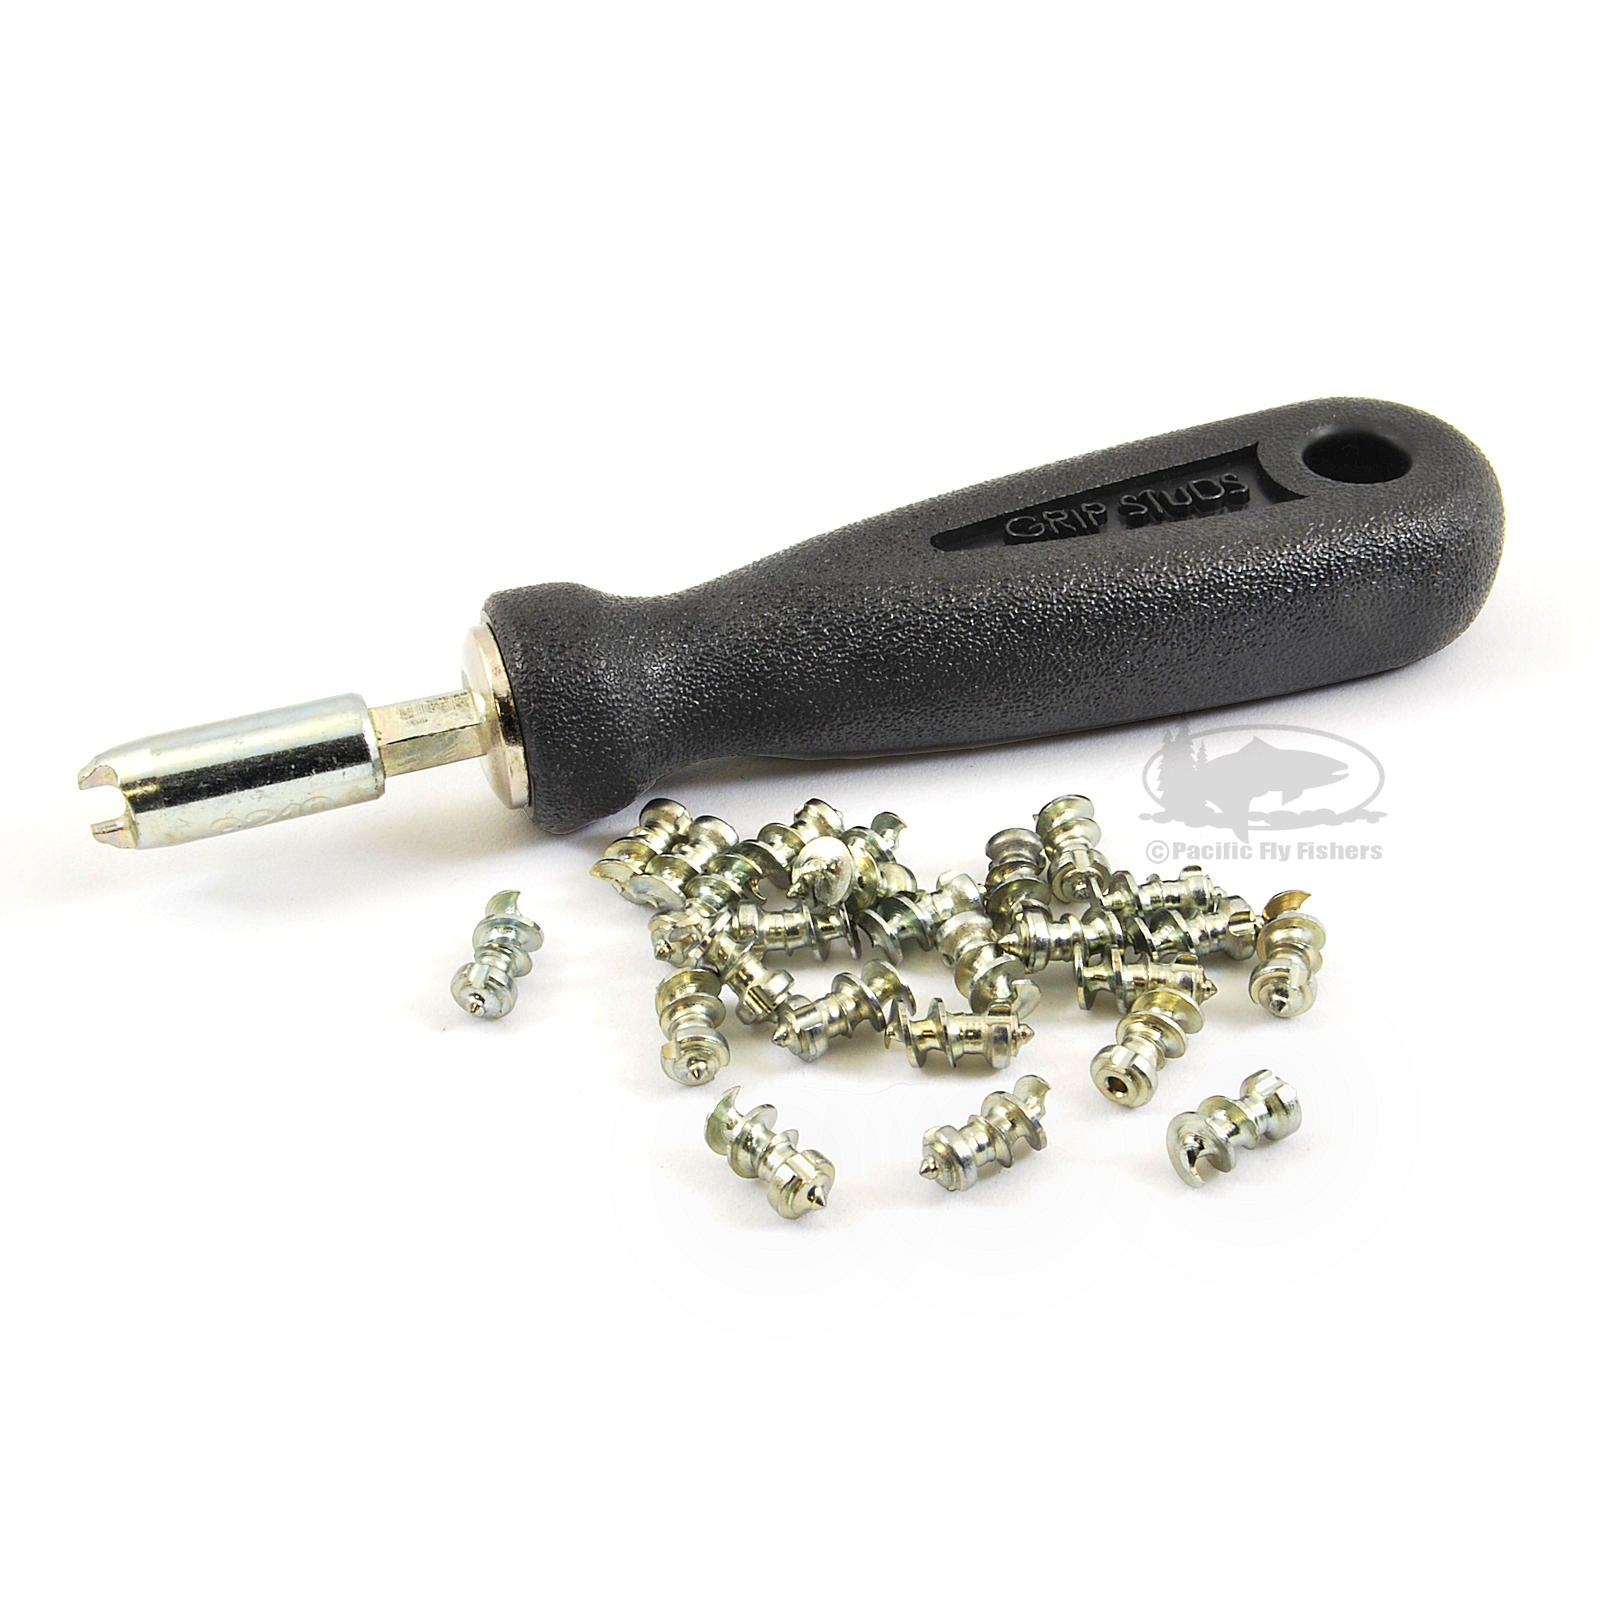  Orvis Posigrip Screw-in Studs for Wading Boots - Tungsten  Carbide Traction Studs for Fishing Shoes and Boots : Clothing, Shoes &  Jewelry